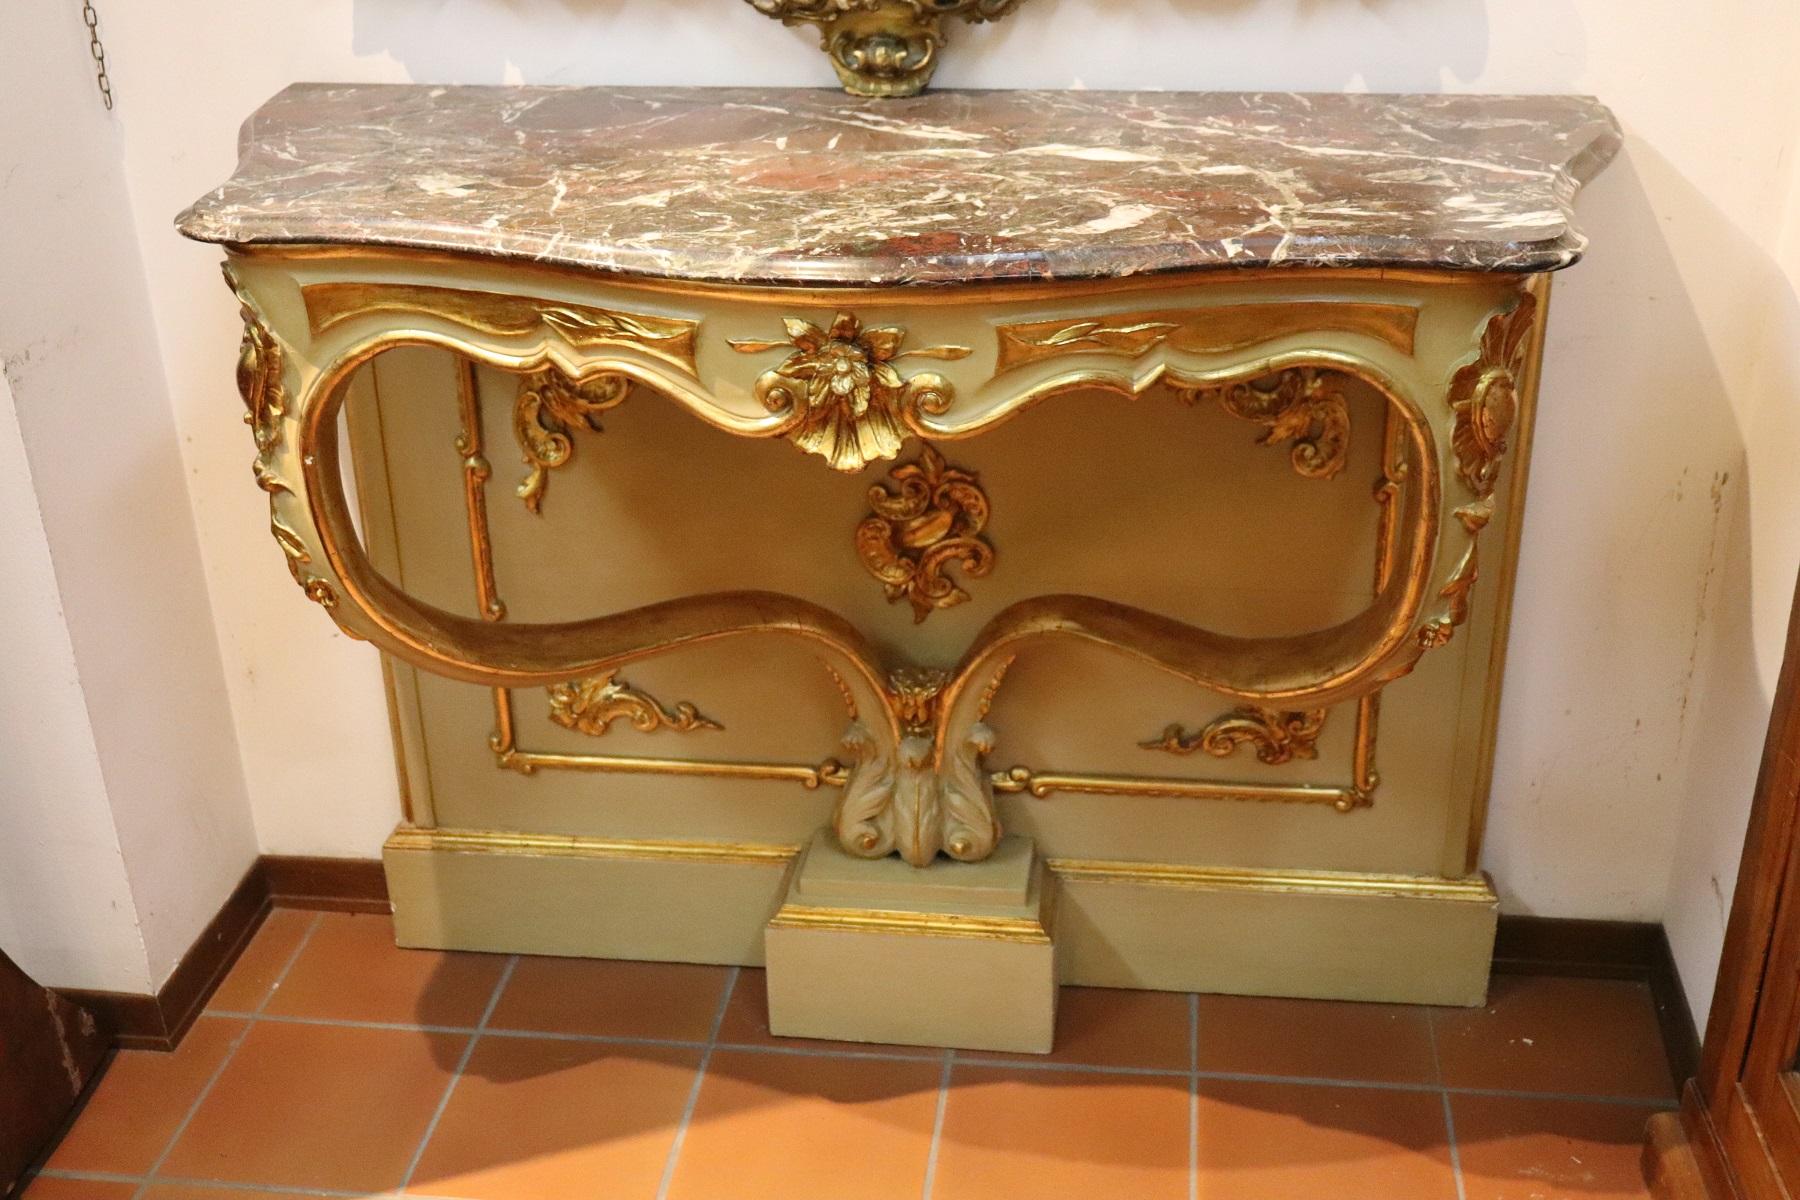 Italian antique console table, 1840. Characterized by precious lacquered and Gilded. Fine gray Italian marble top with red bordeaux veins. The wood is finely decorated with carving with moved front legs. Beautiful elegant ideal for the entrance of